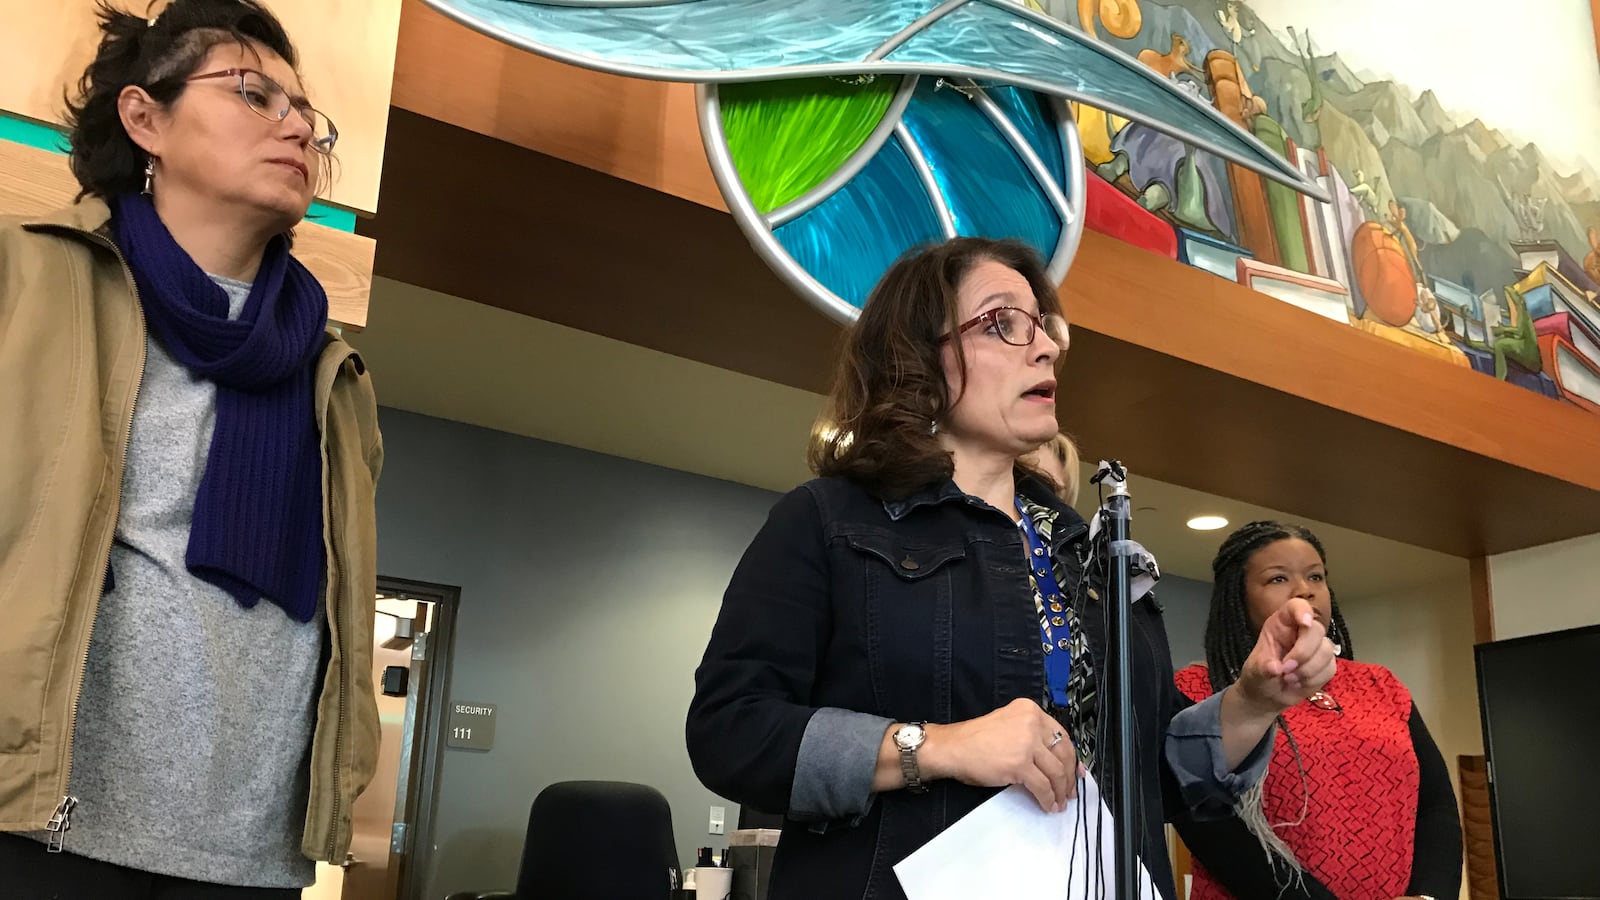 Denver Public Schools Superintendent Susana Cordova speaks at a press conference addressing the email about immigrant teachers.